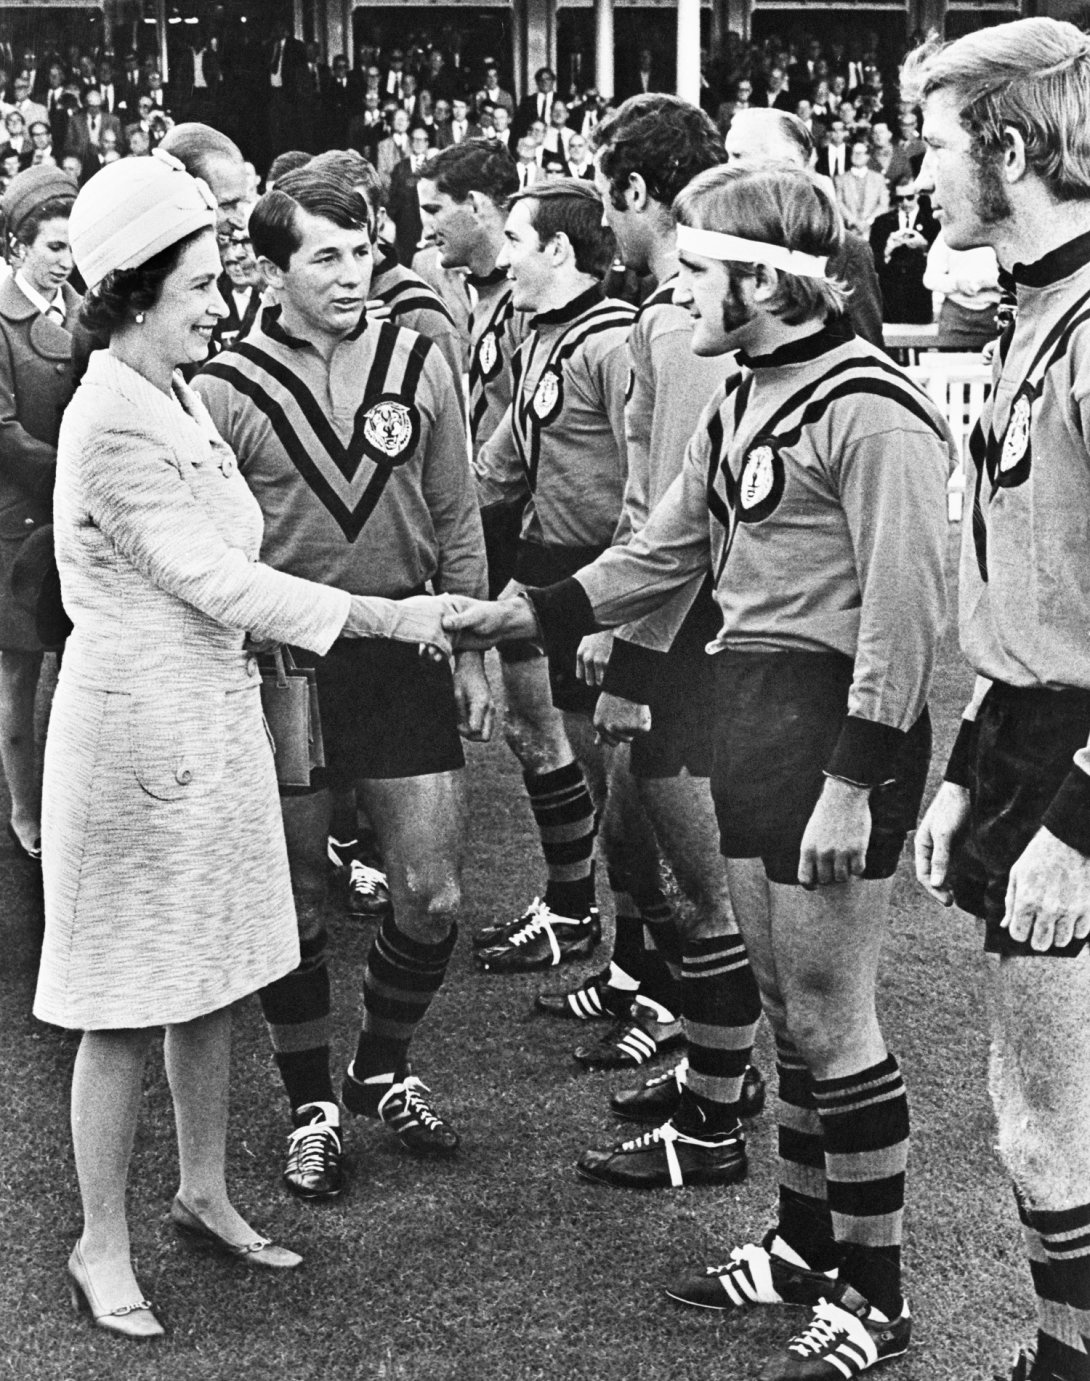 A black and white image of the Queen meeting and shaking hands with a team of rugby players.